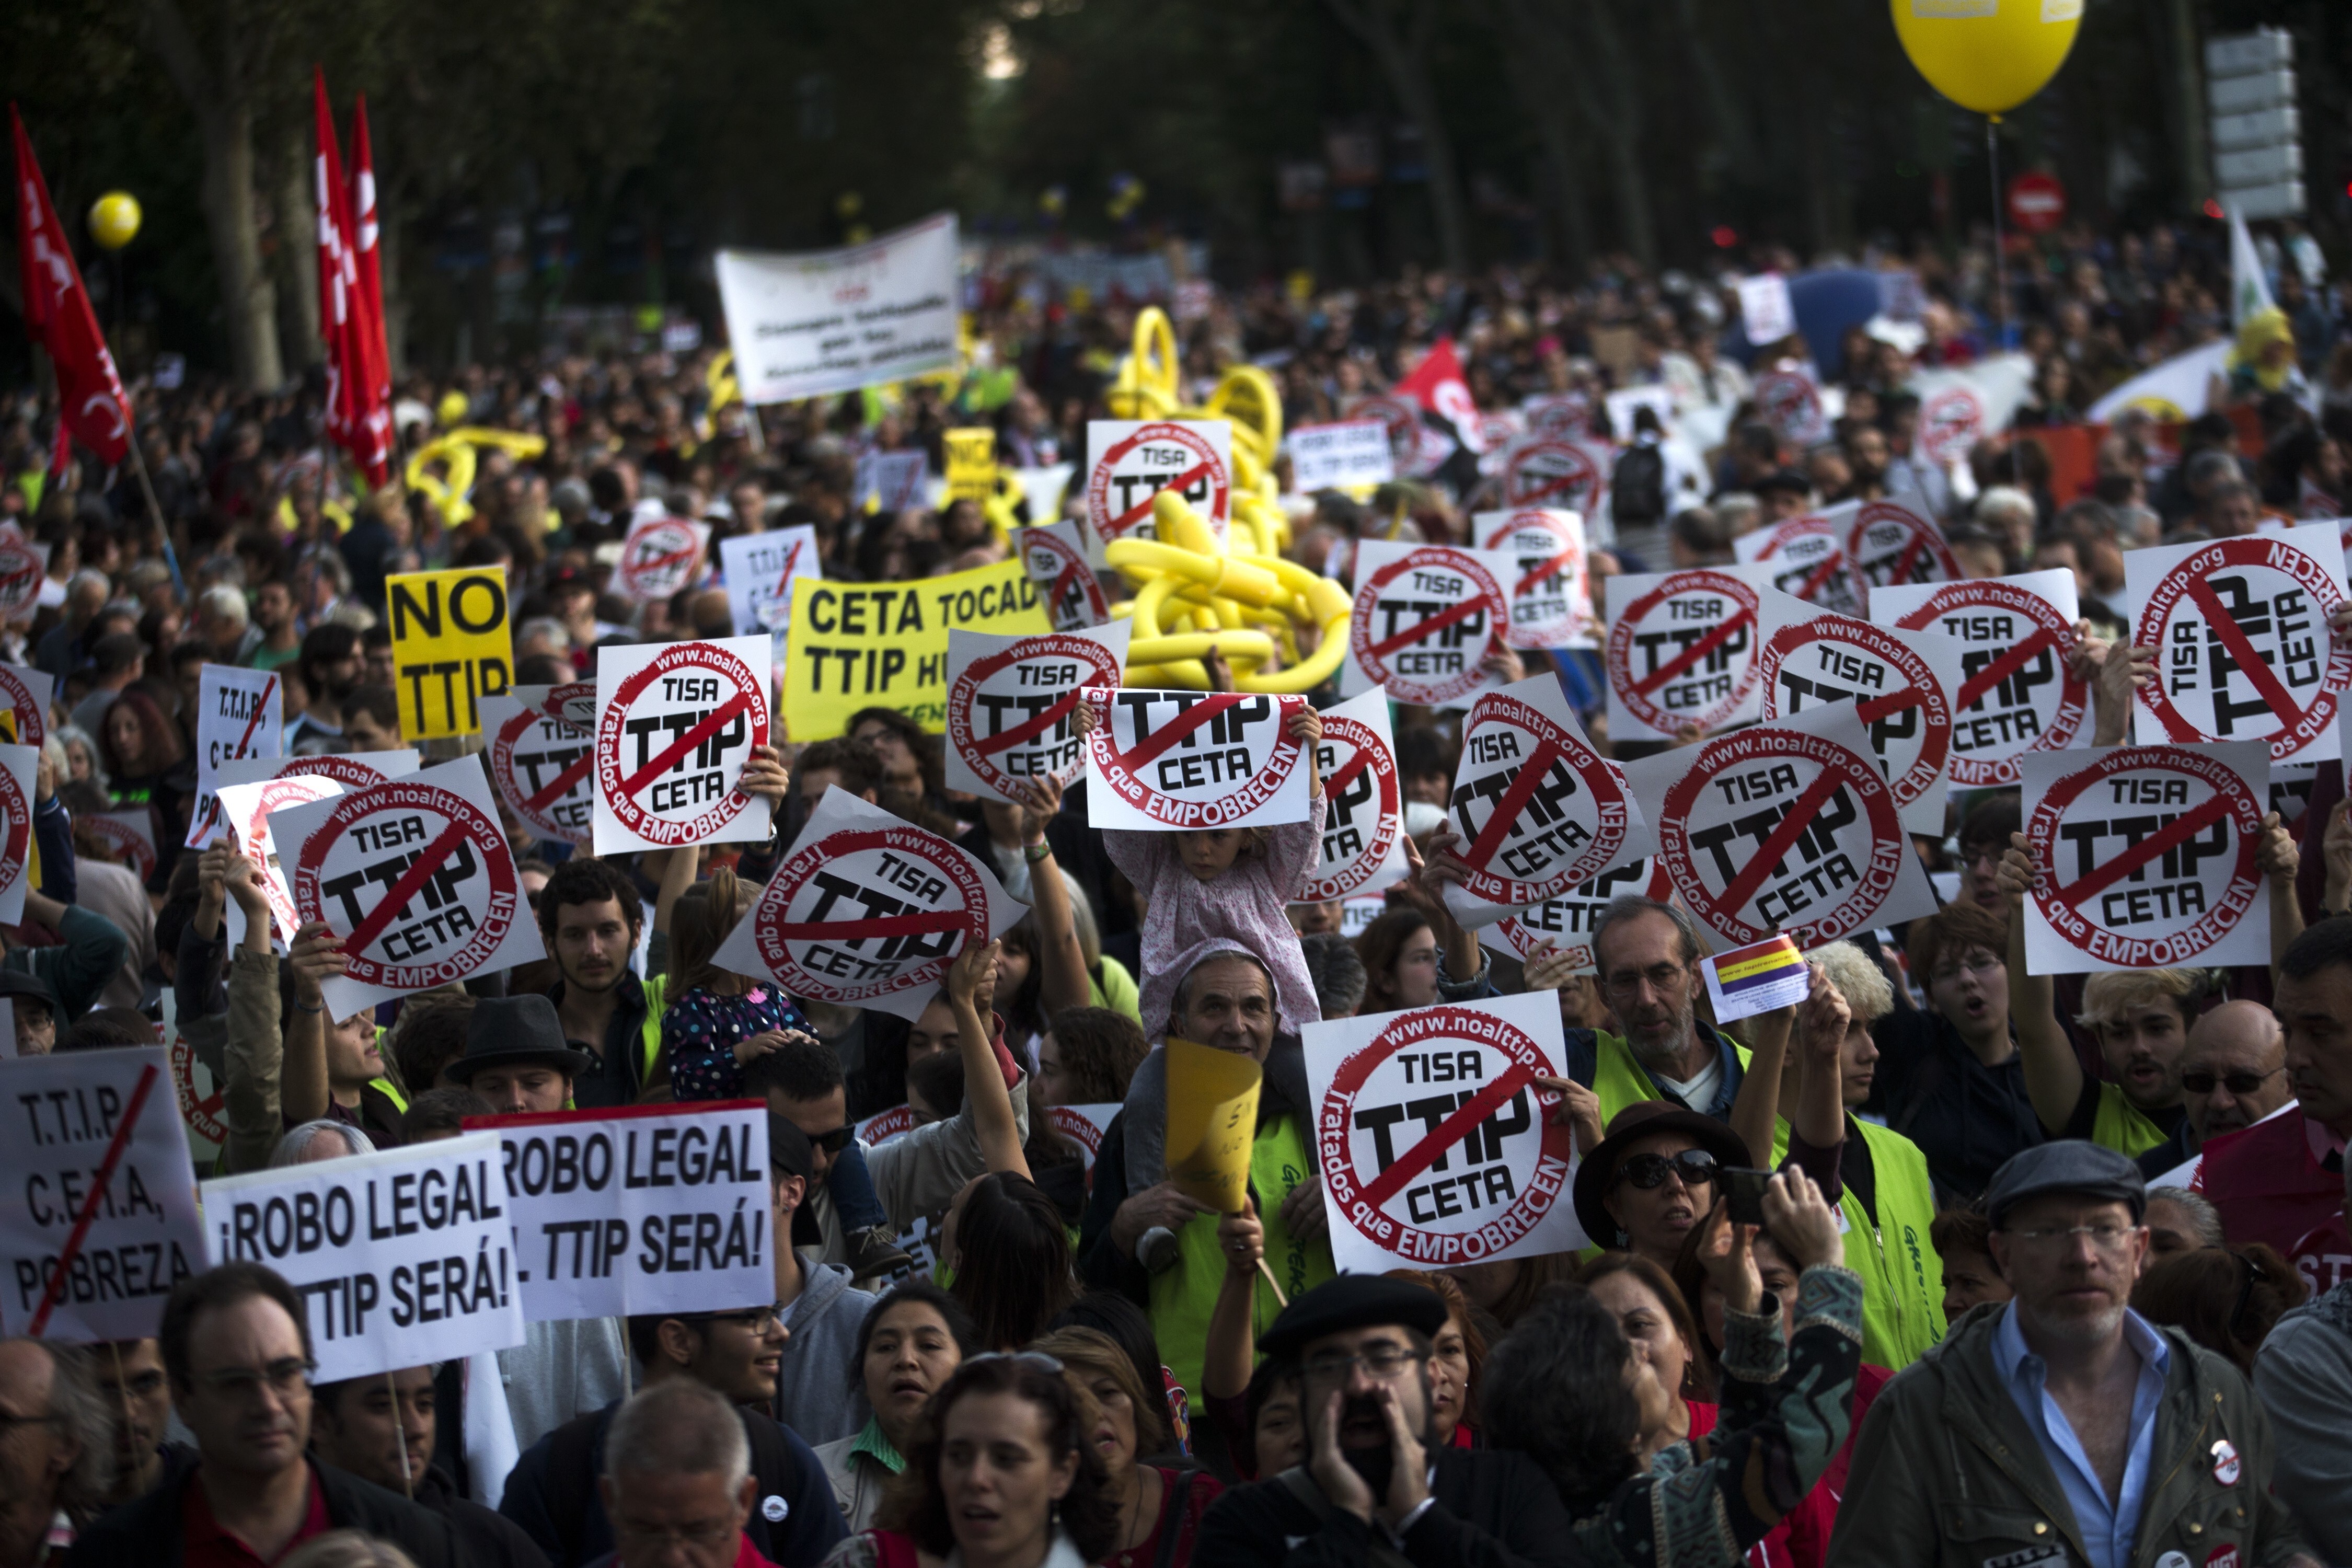 People hold up posters against the Transatlantic Trade and Investment Partnership (TTIP) during a protest in Madrid, Spain, on October 15, 2016. Attempts to revive the deal under US President-elect Joe Biden are likely to receive intense resistance from politicians and the public on both sides of the Atlantic. Photo: AP